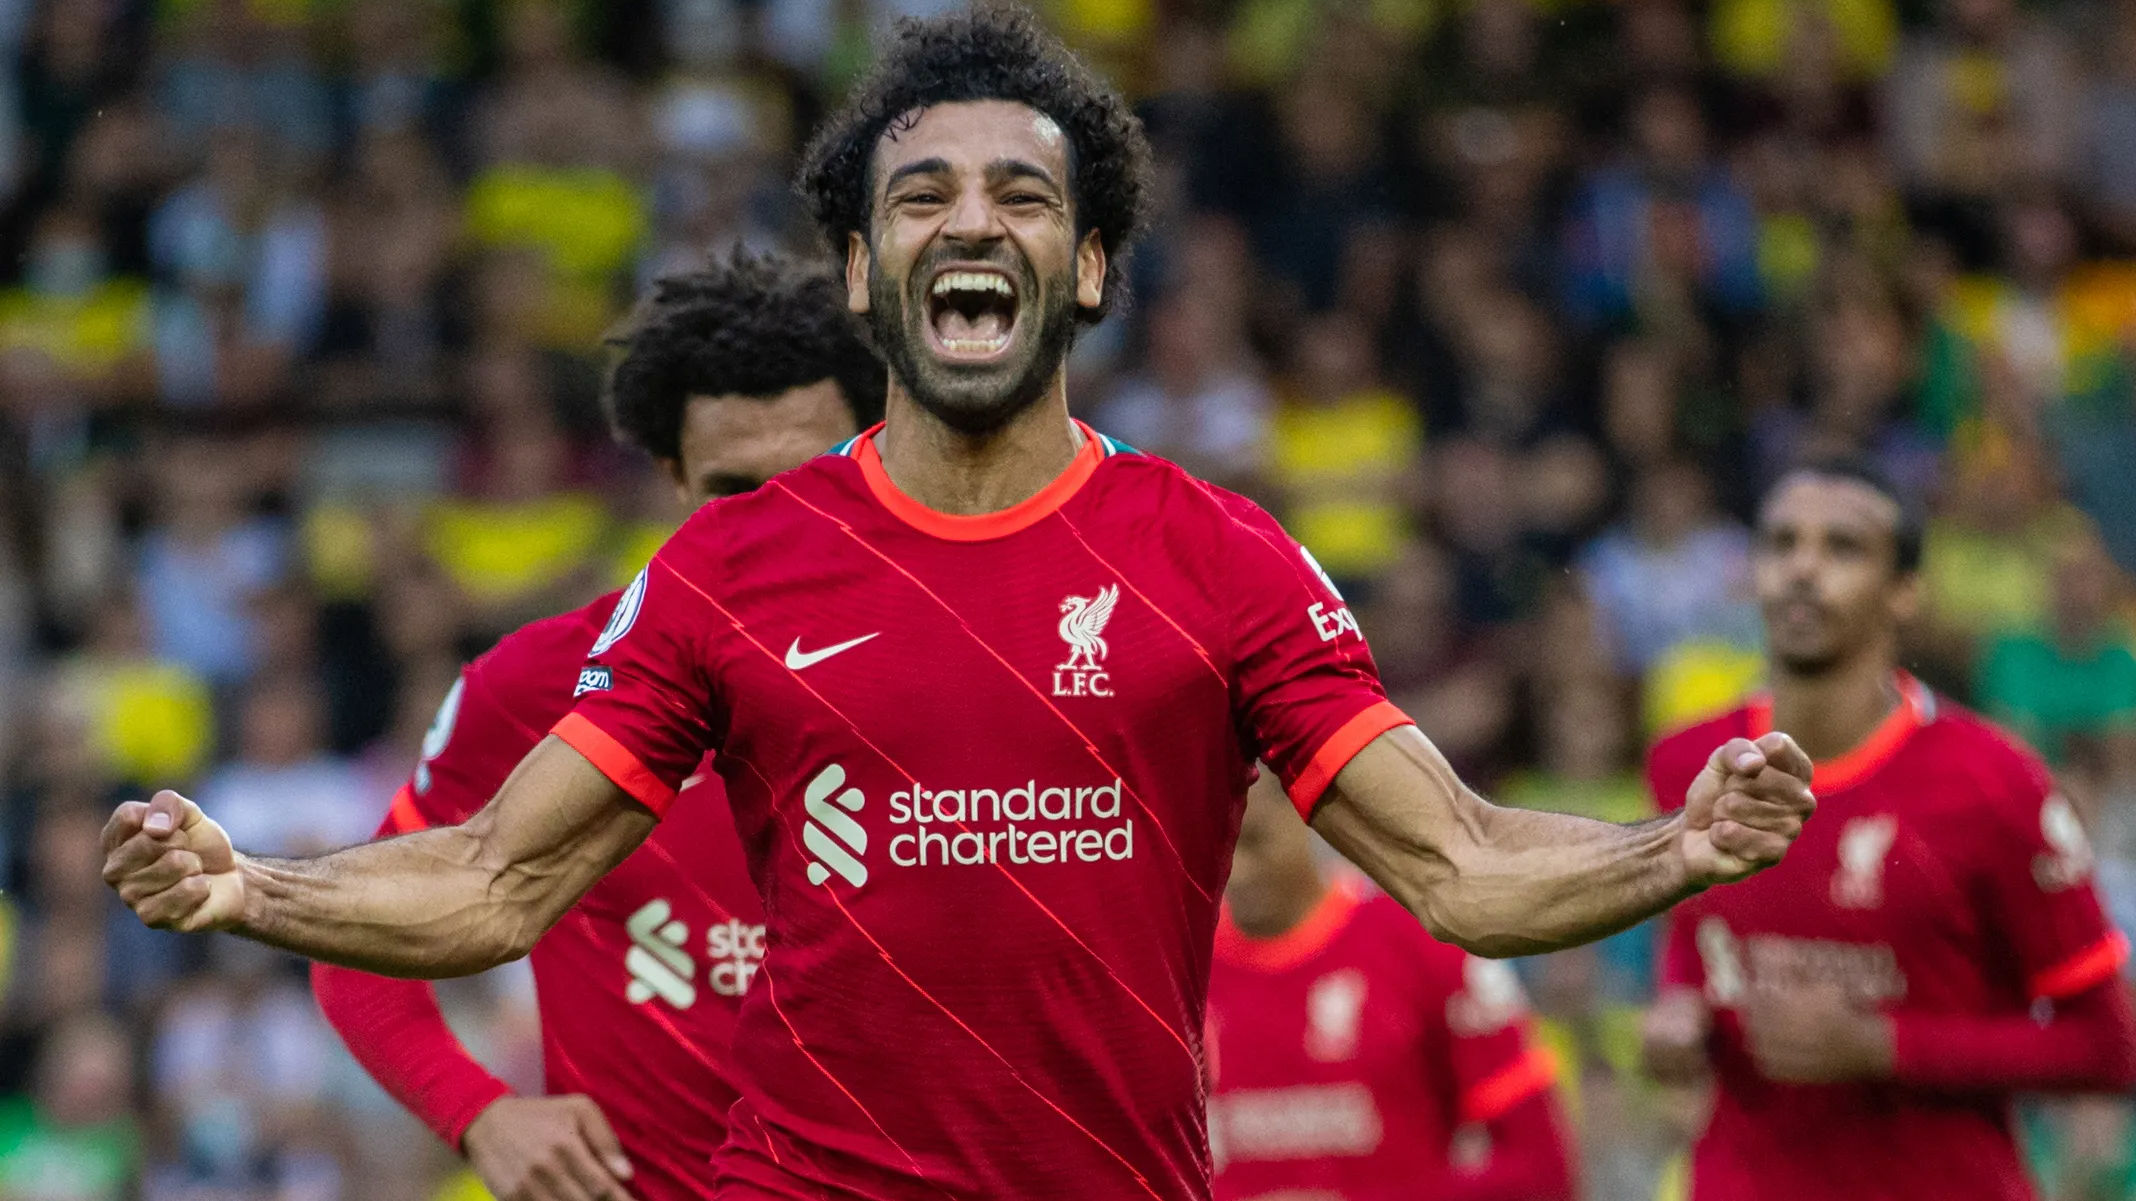 Premier League: Salah inspires Liverpool to comfortable victory over Norwich